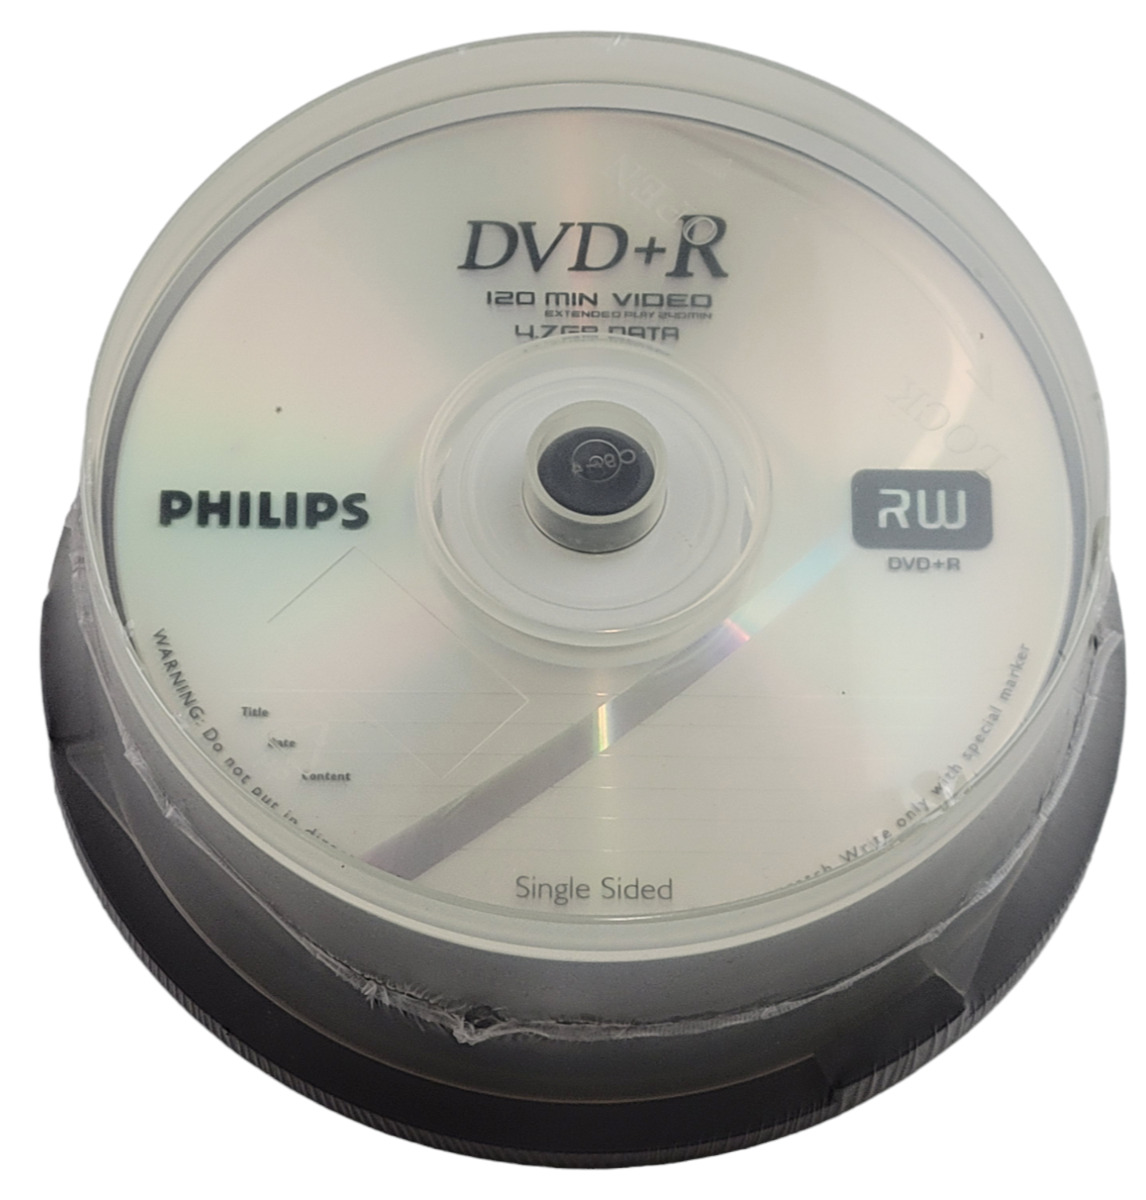 Philips DVD+R 4.7GB Data | 120 min. | 25 Pack Spindle | NEW SEALED BLANK MEDIA